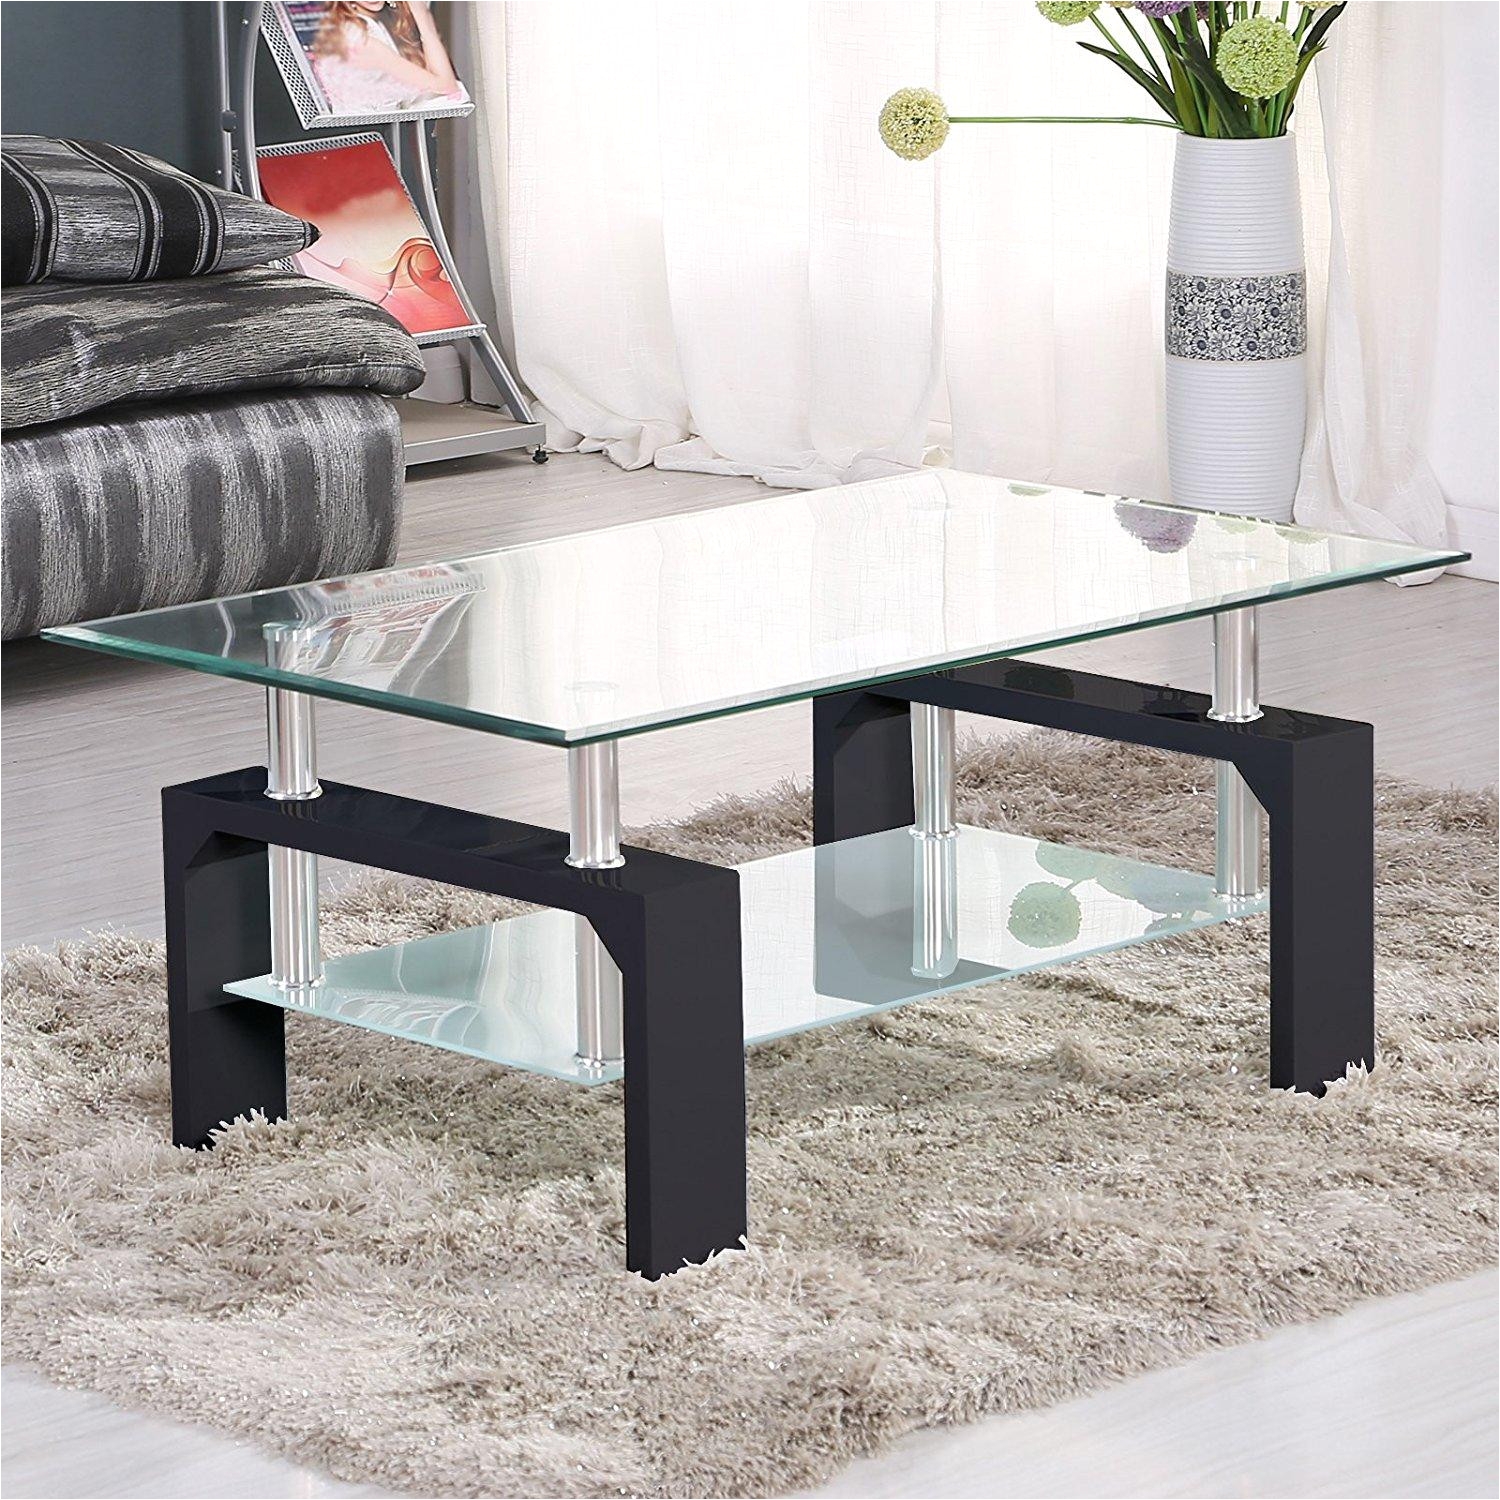 Brass and Glass Coffee Table Awesome 31 Elegant Brass and Glass Coffee Table Coffee Tables Ideas